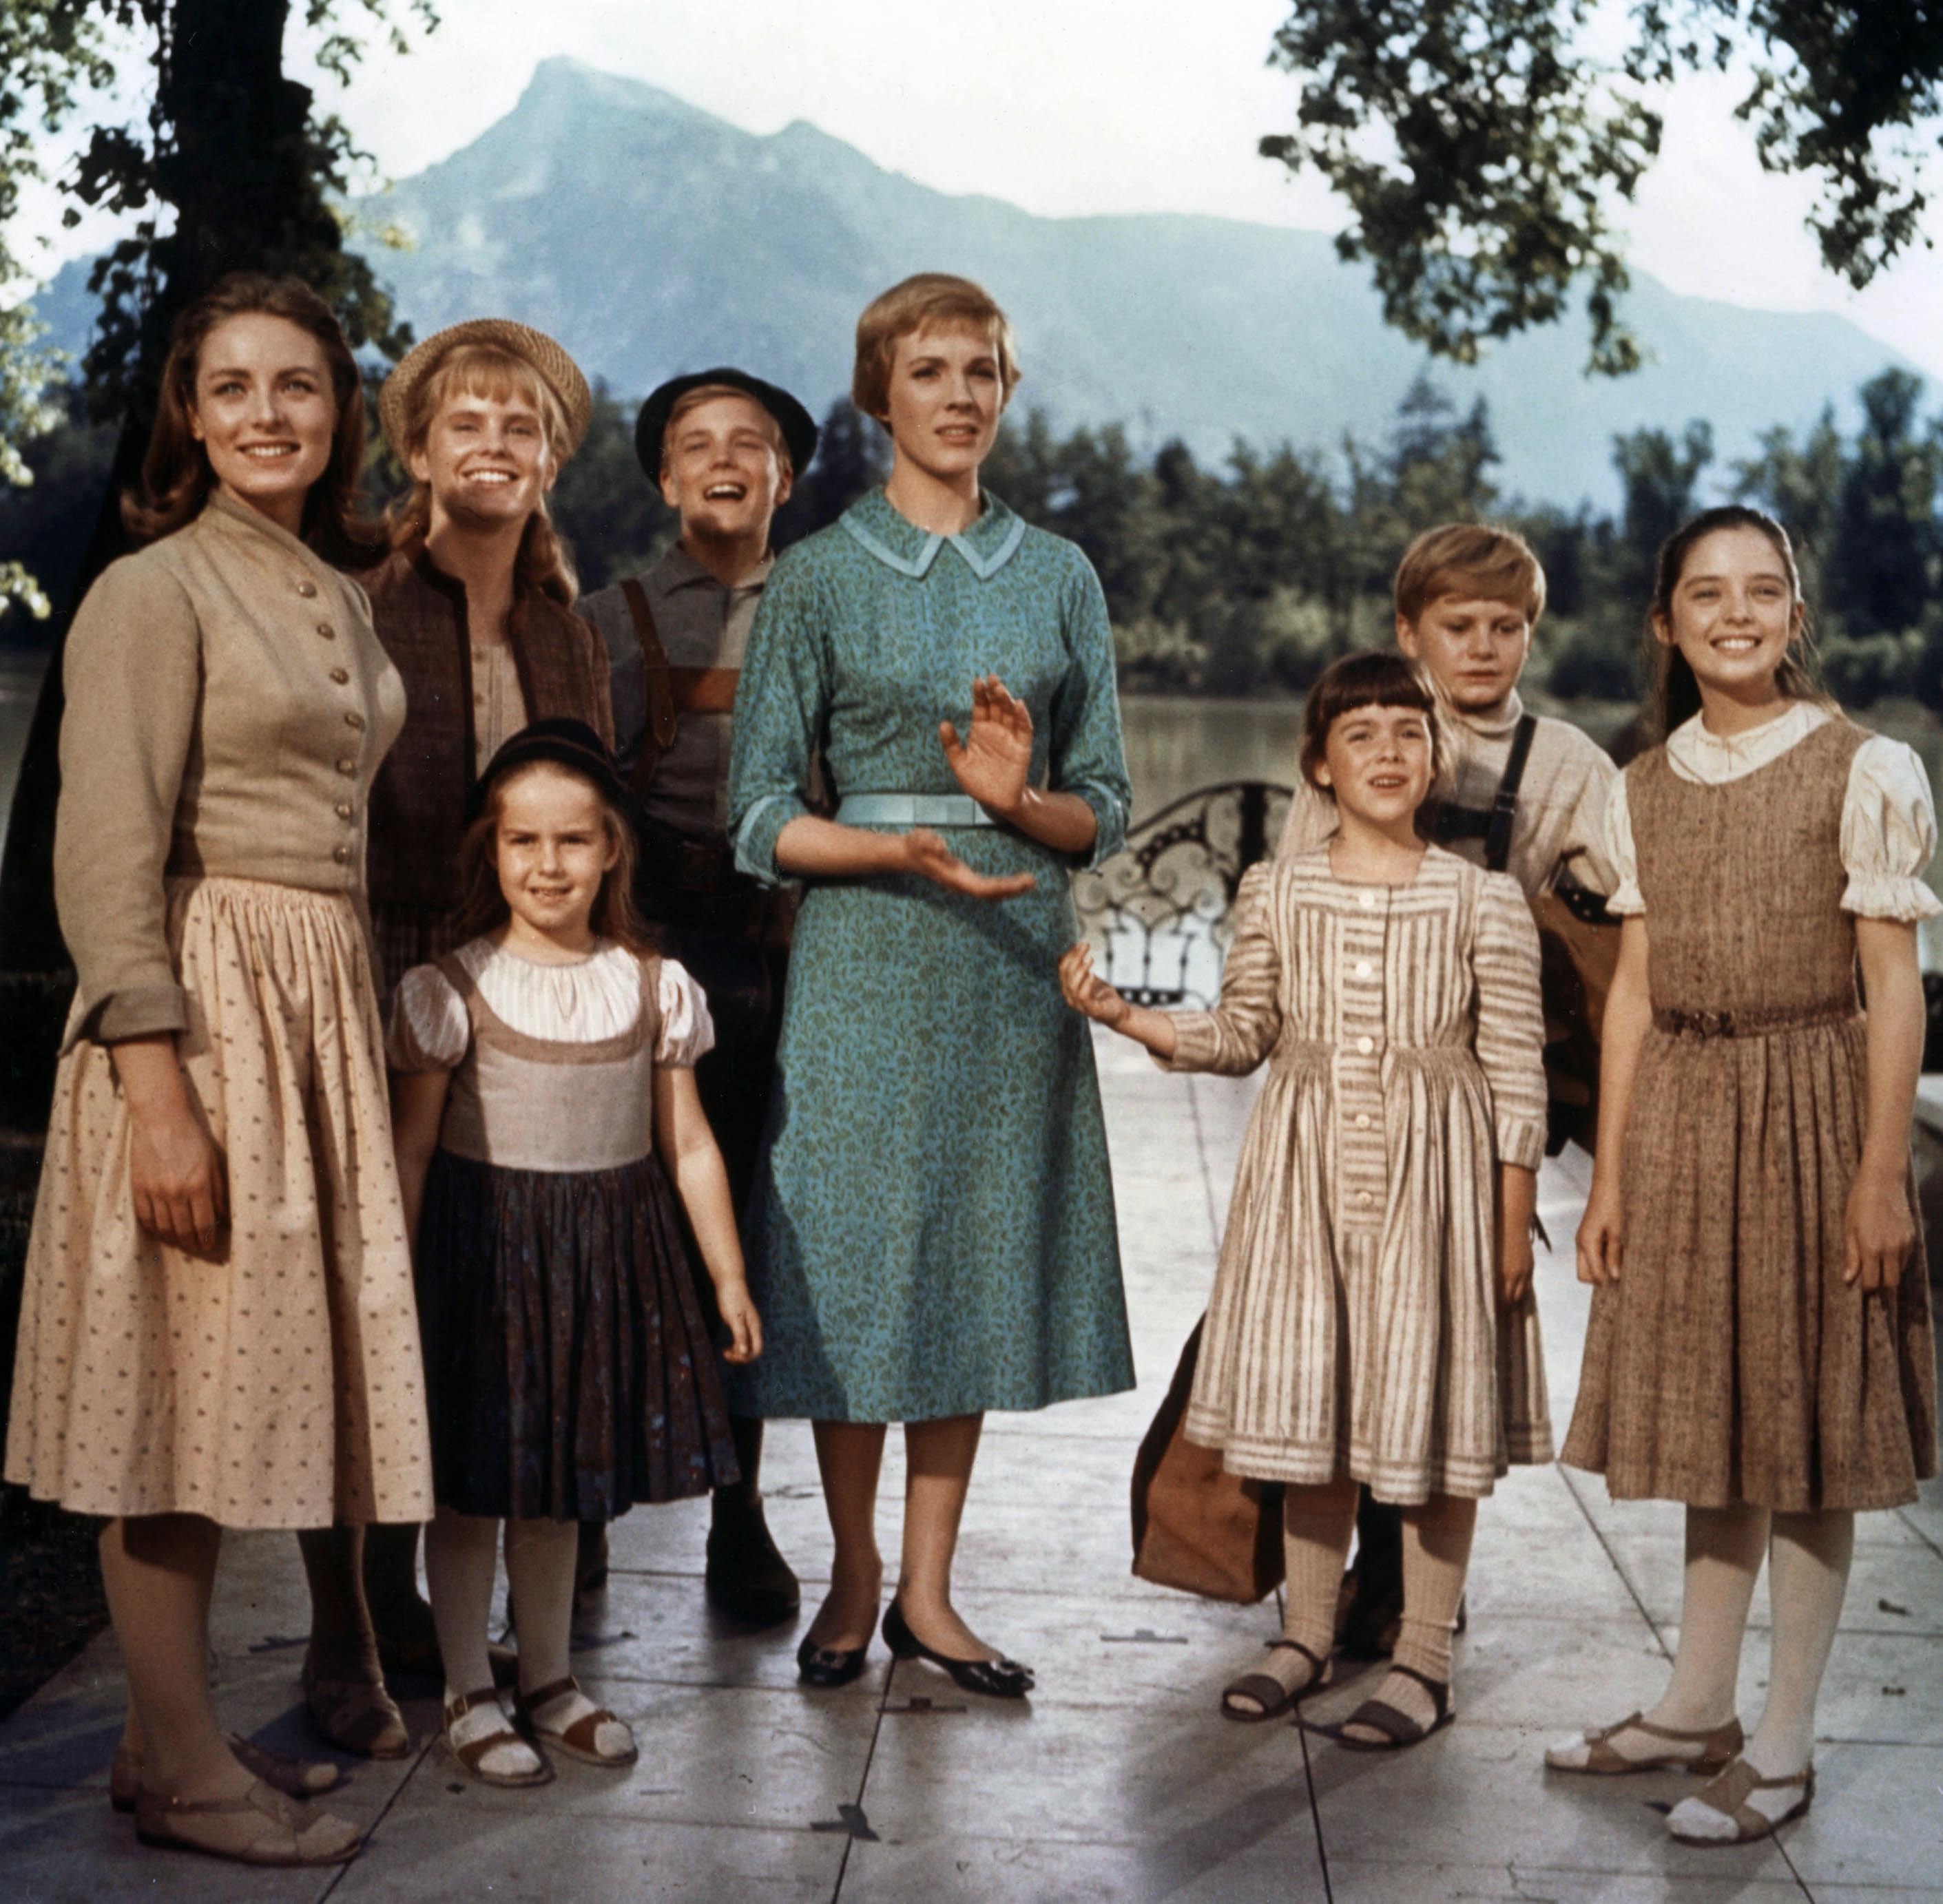 The Sound of Music cast: Where are they now? | Gallery | Wonderwall.com